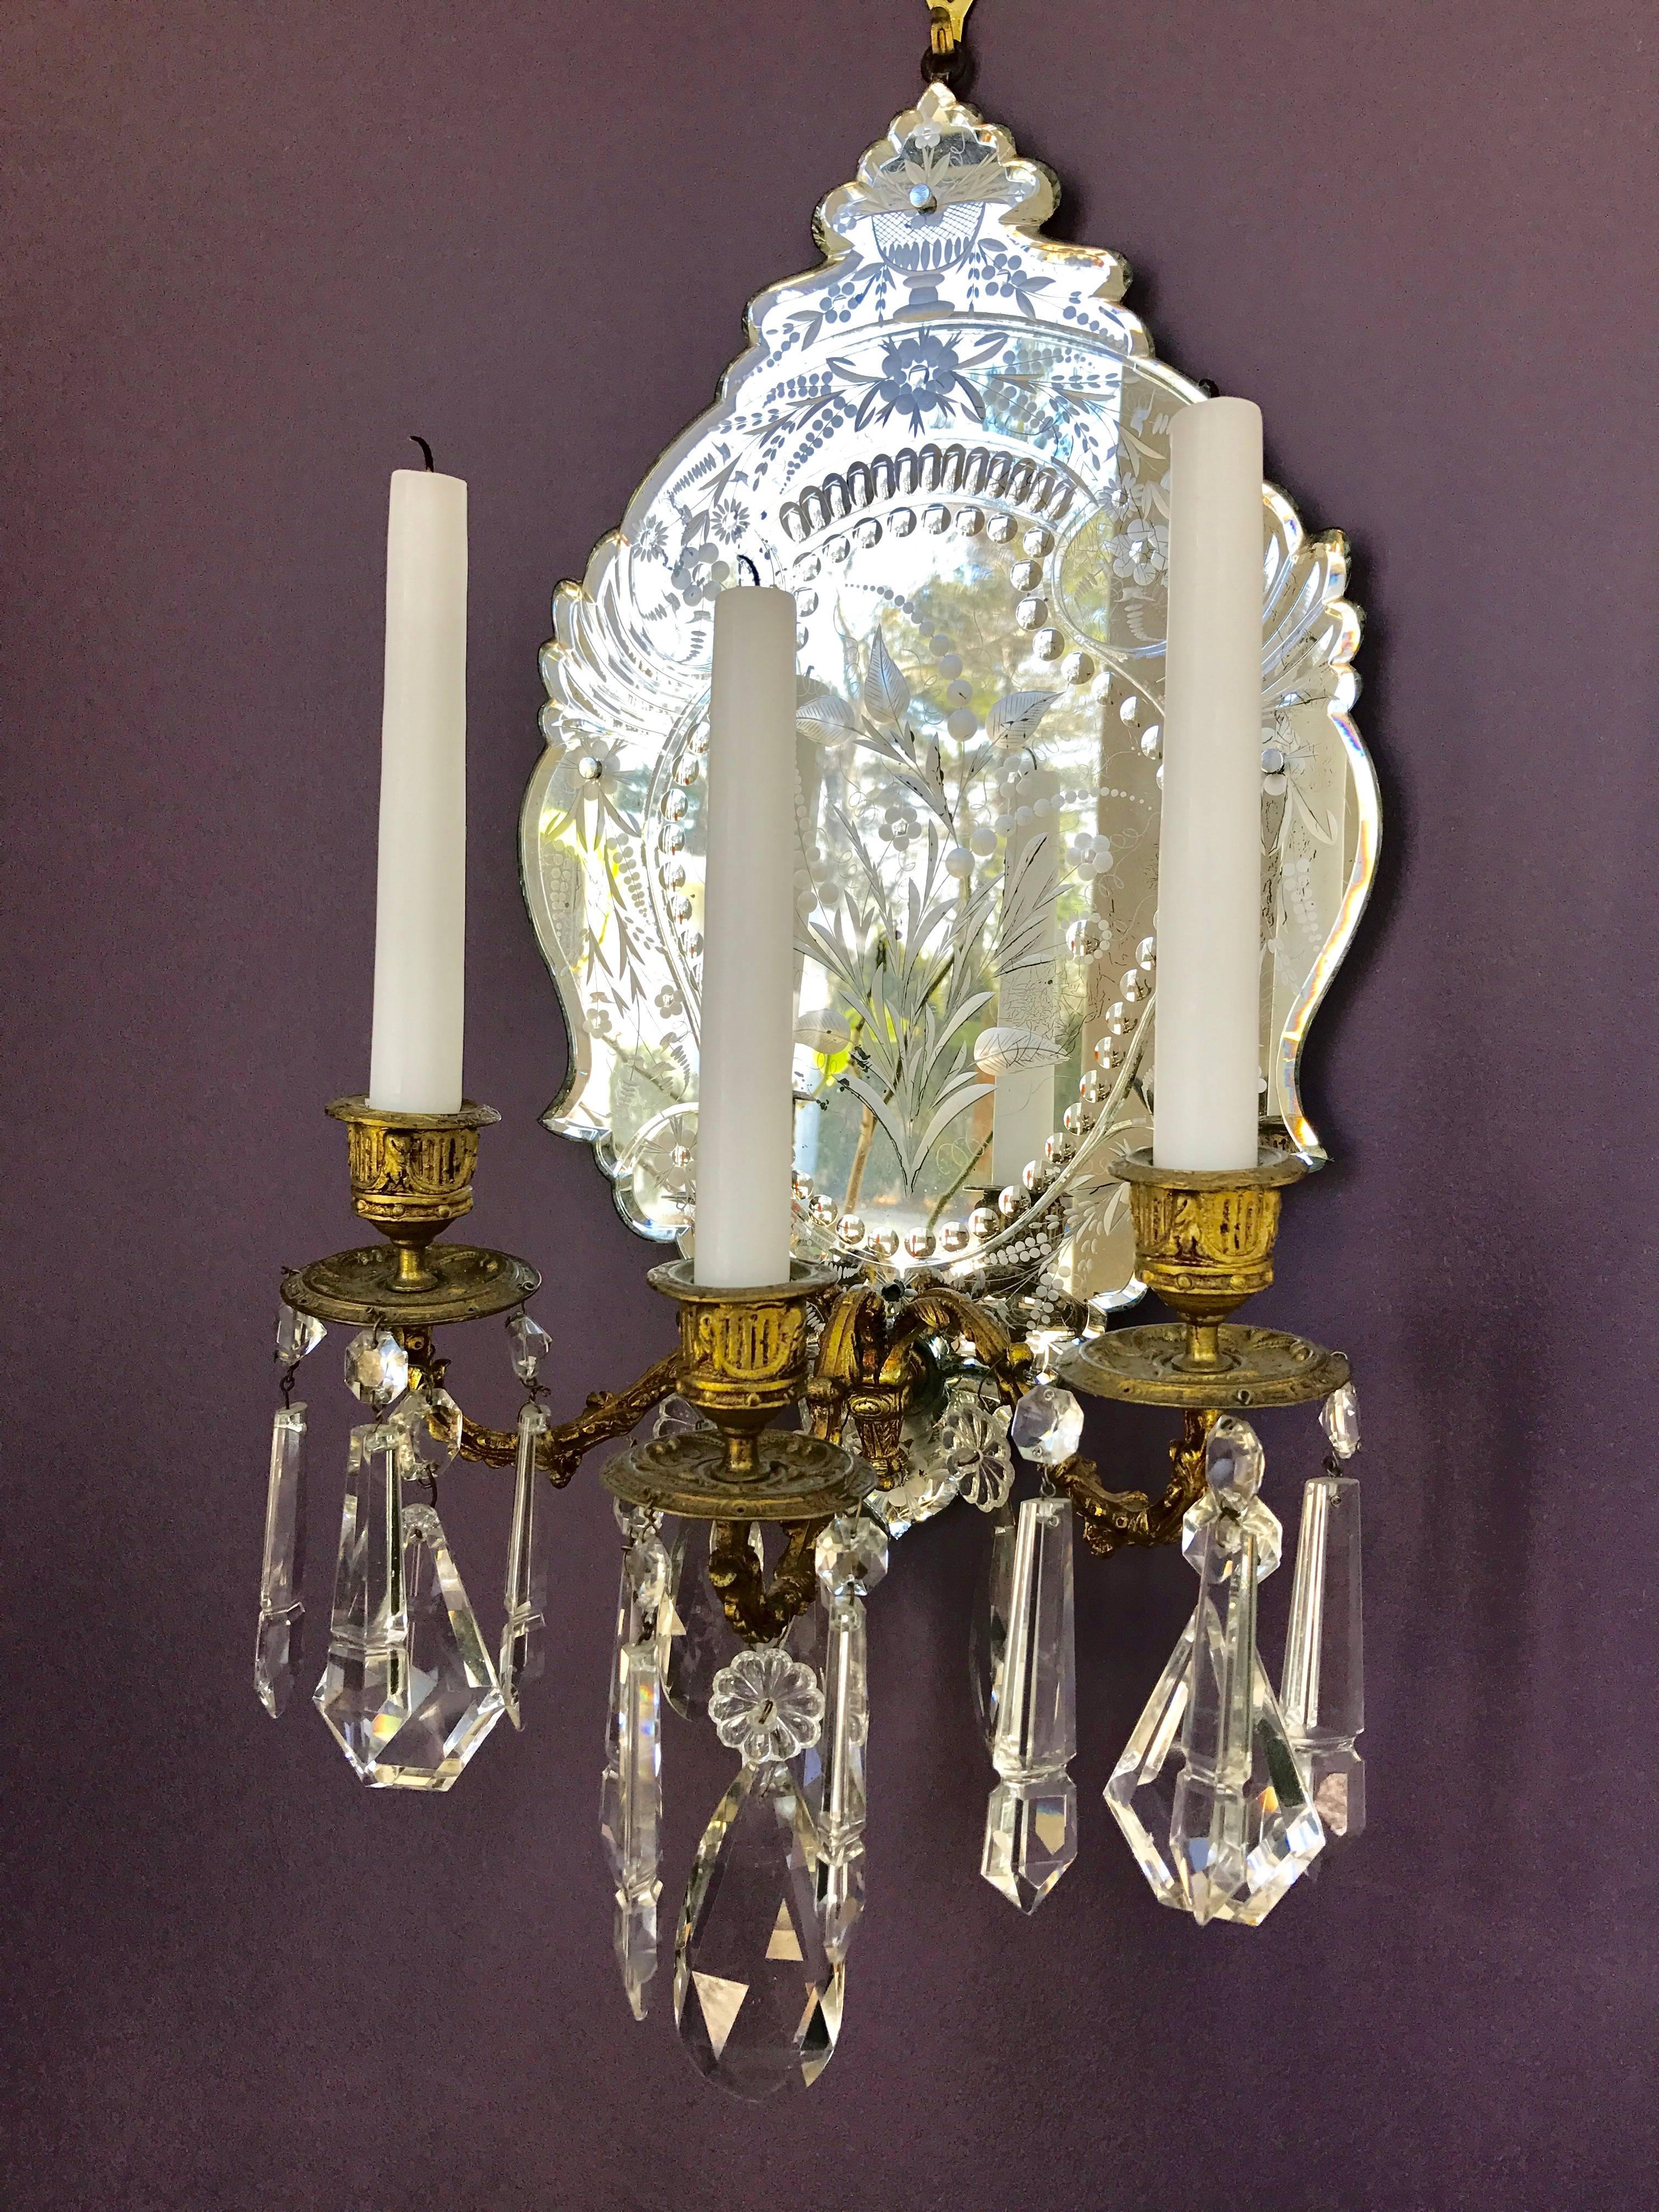 High quality Venetian Mirror three-arm wall sconce with an elaborately etched thick crystal mirror backplate. The 18th century style gilt bronze arms are decorated with lead crystal prisms. 
Measures: 23